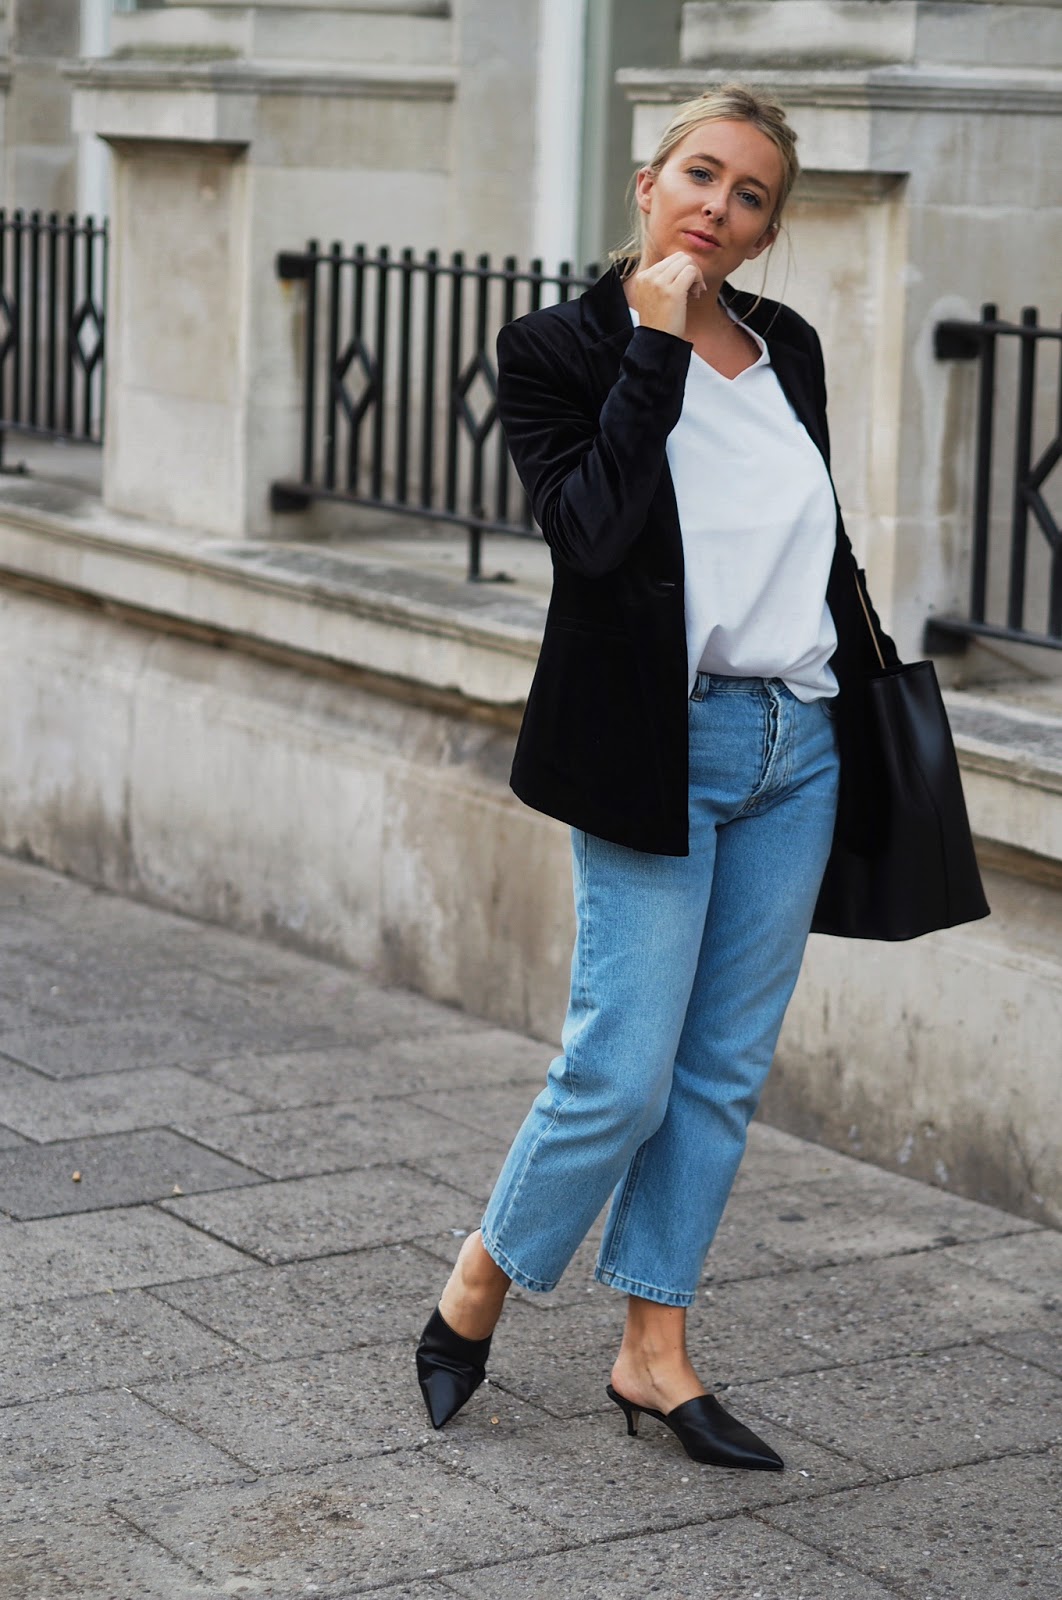 The Best High Street Denim Buy This Summer - Petite Side of Style